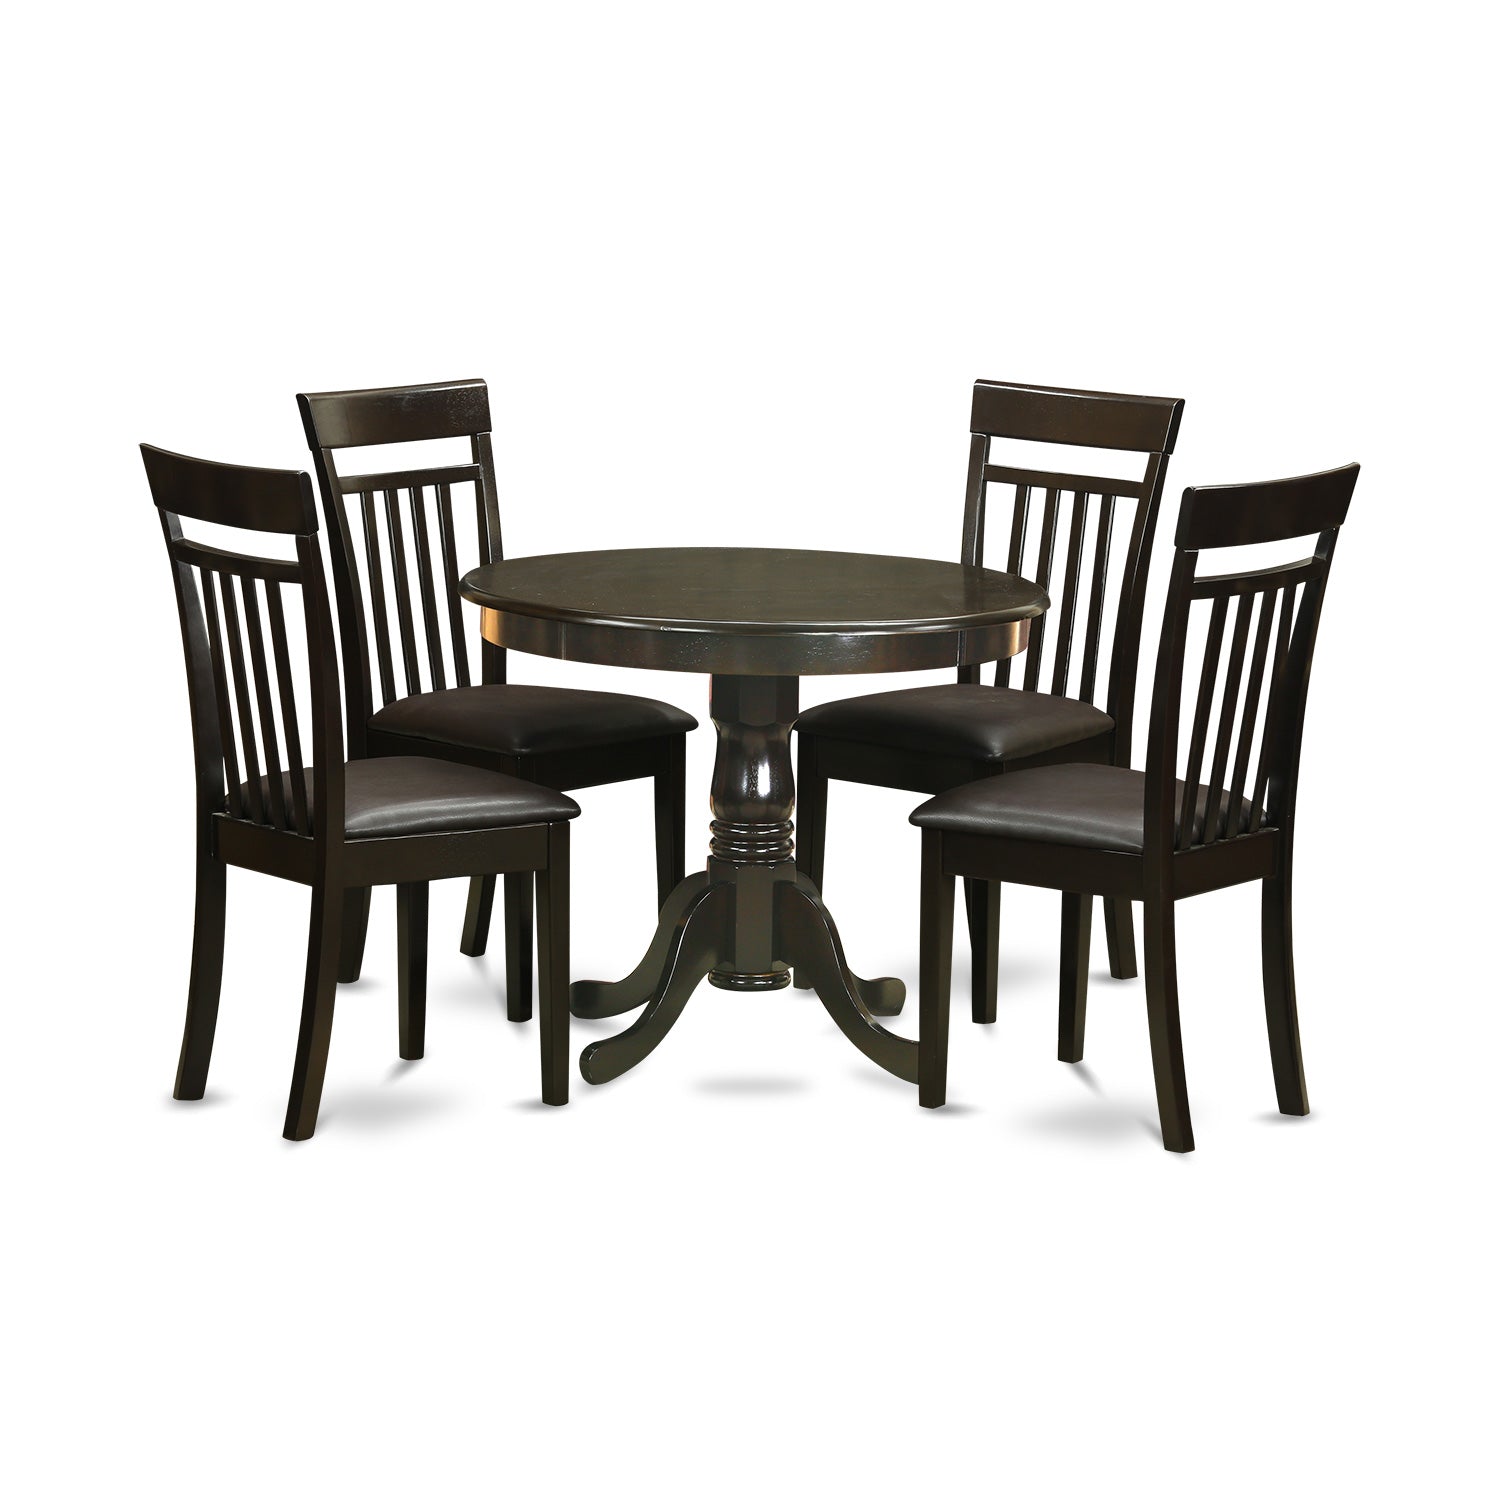 ANCA5-CAP-LC 5 PC small Kitchen Table and Chairs set-round Table and 4 Chairs for Dining room